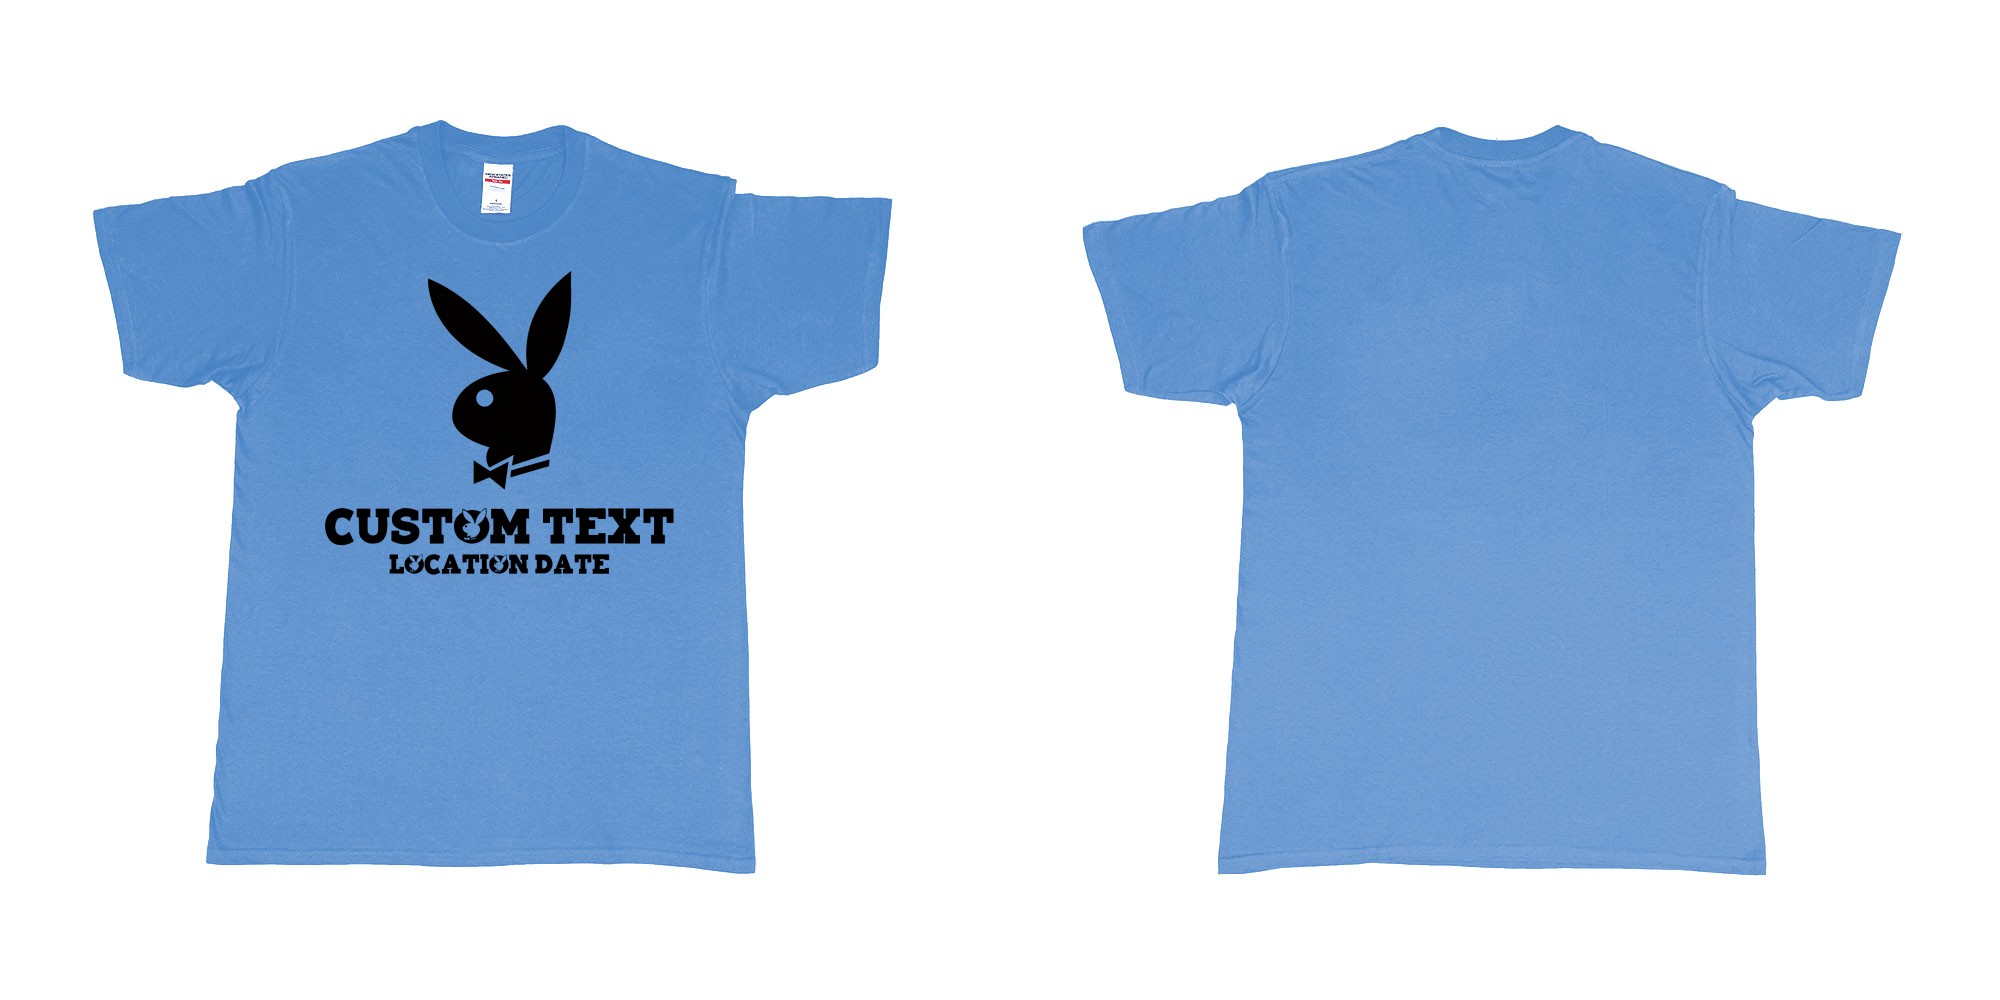 Custom tshirt design playboy playgirl custom text tshirt in fabric color carolina-blue choice your own text made in Bali by The Pirate Way